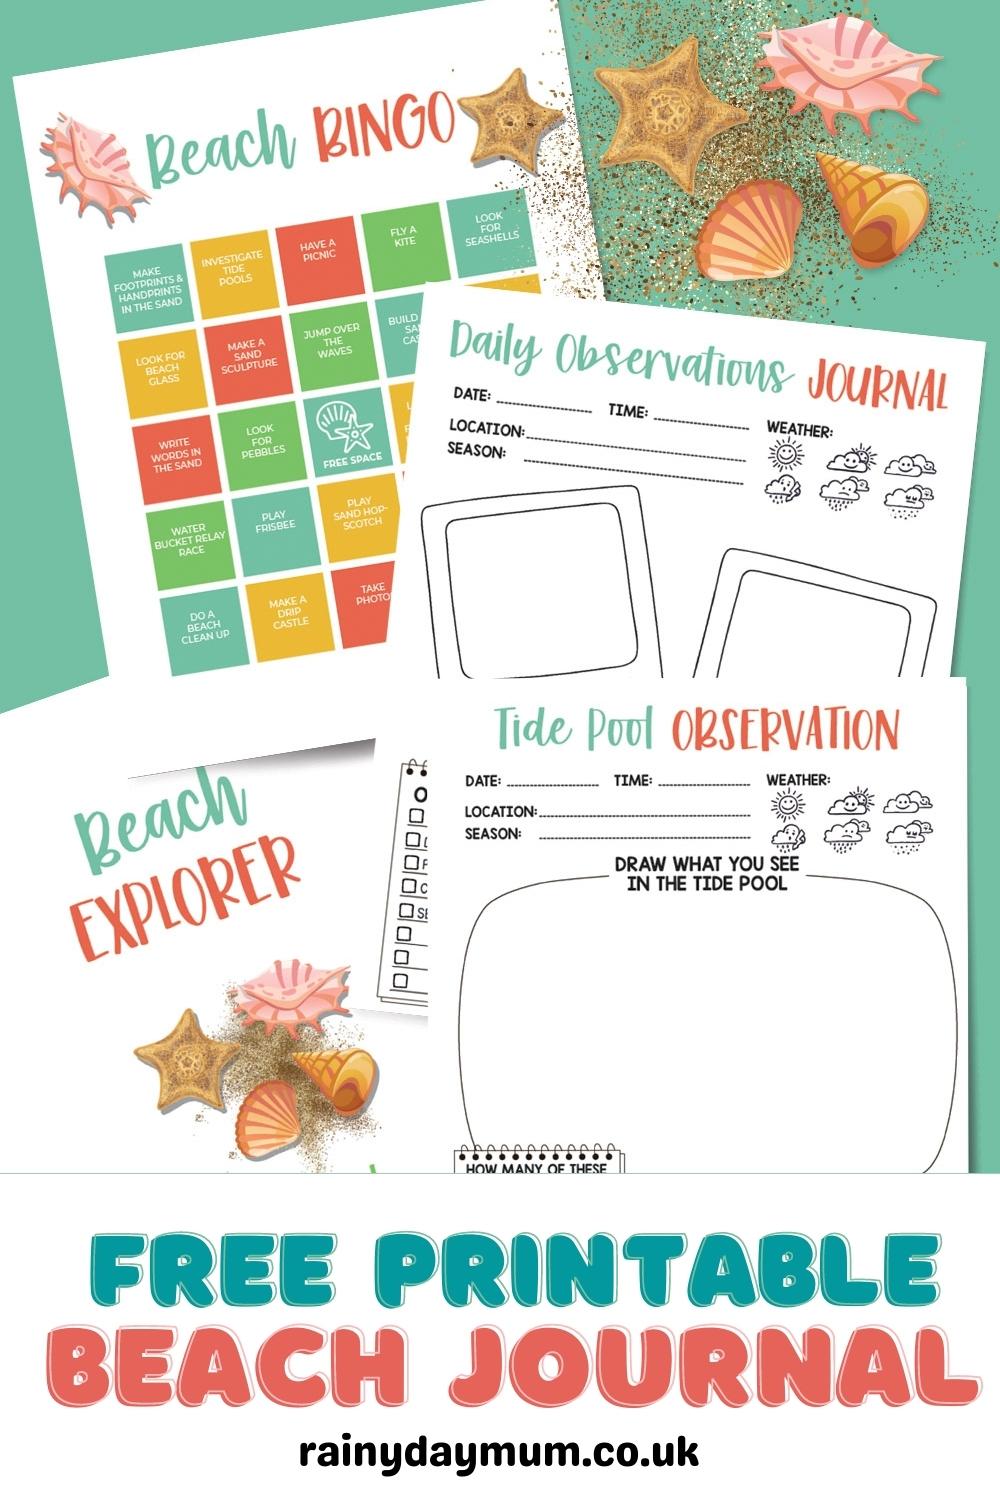 Pinterest image for a FREE Printable Beach Journal for kids showing the 4 pages. A beach bingo of activities, daily observation sheet and a Tide Pool Journal Page.